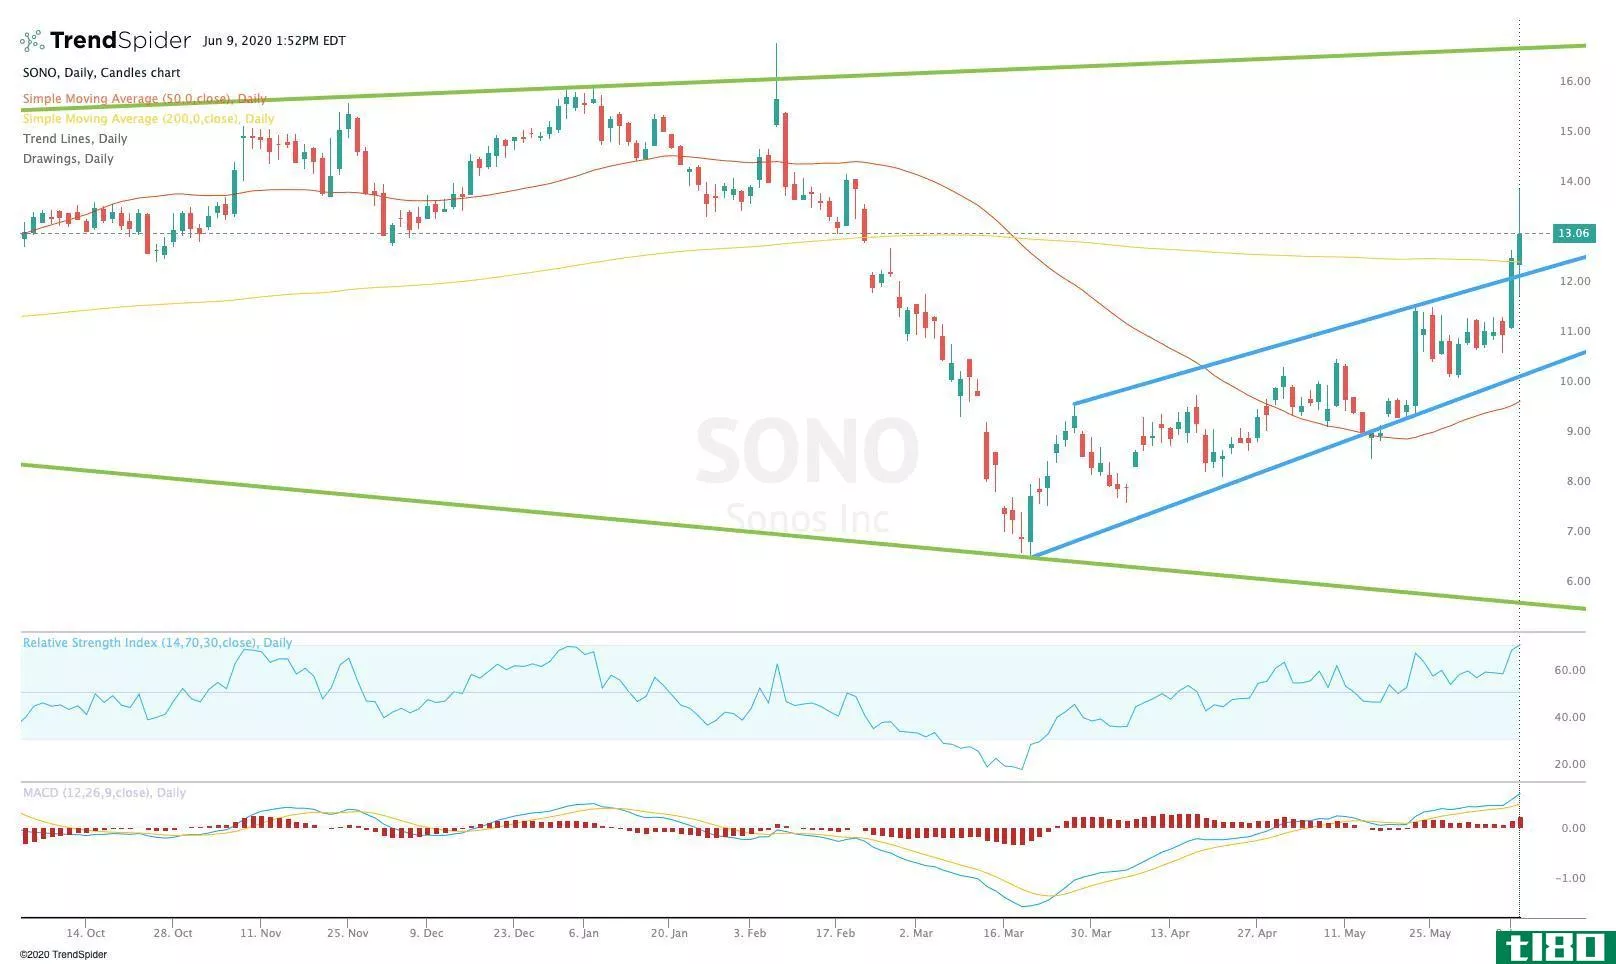 Chart showing the share price performance of Sonos, Inc. (SONO)